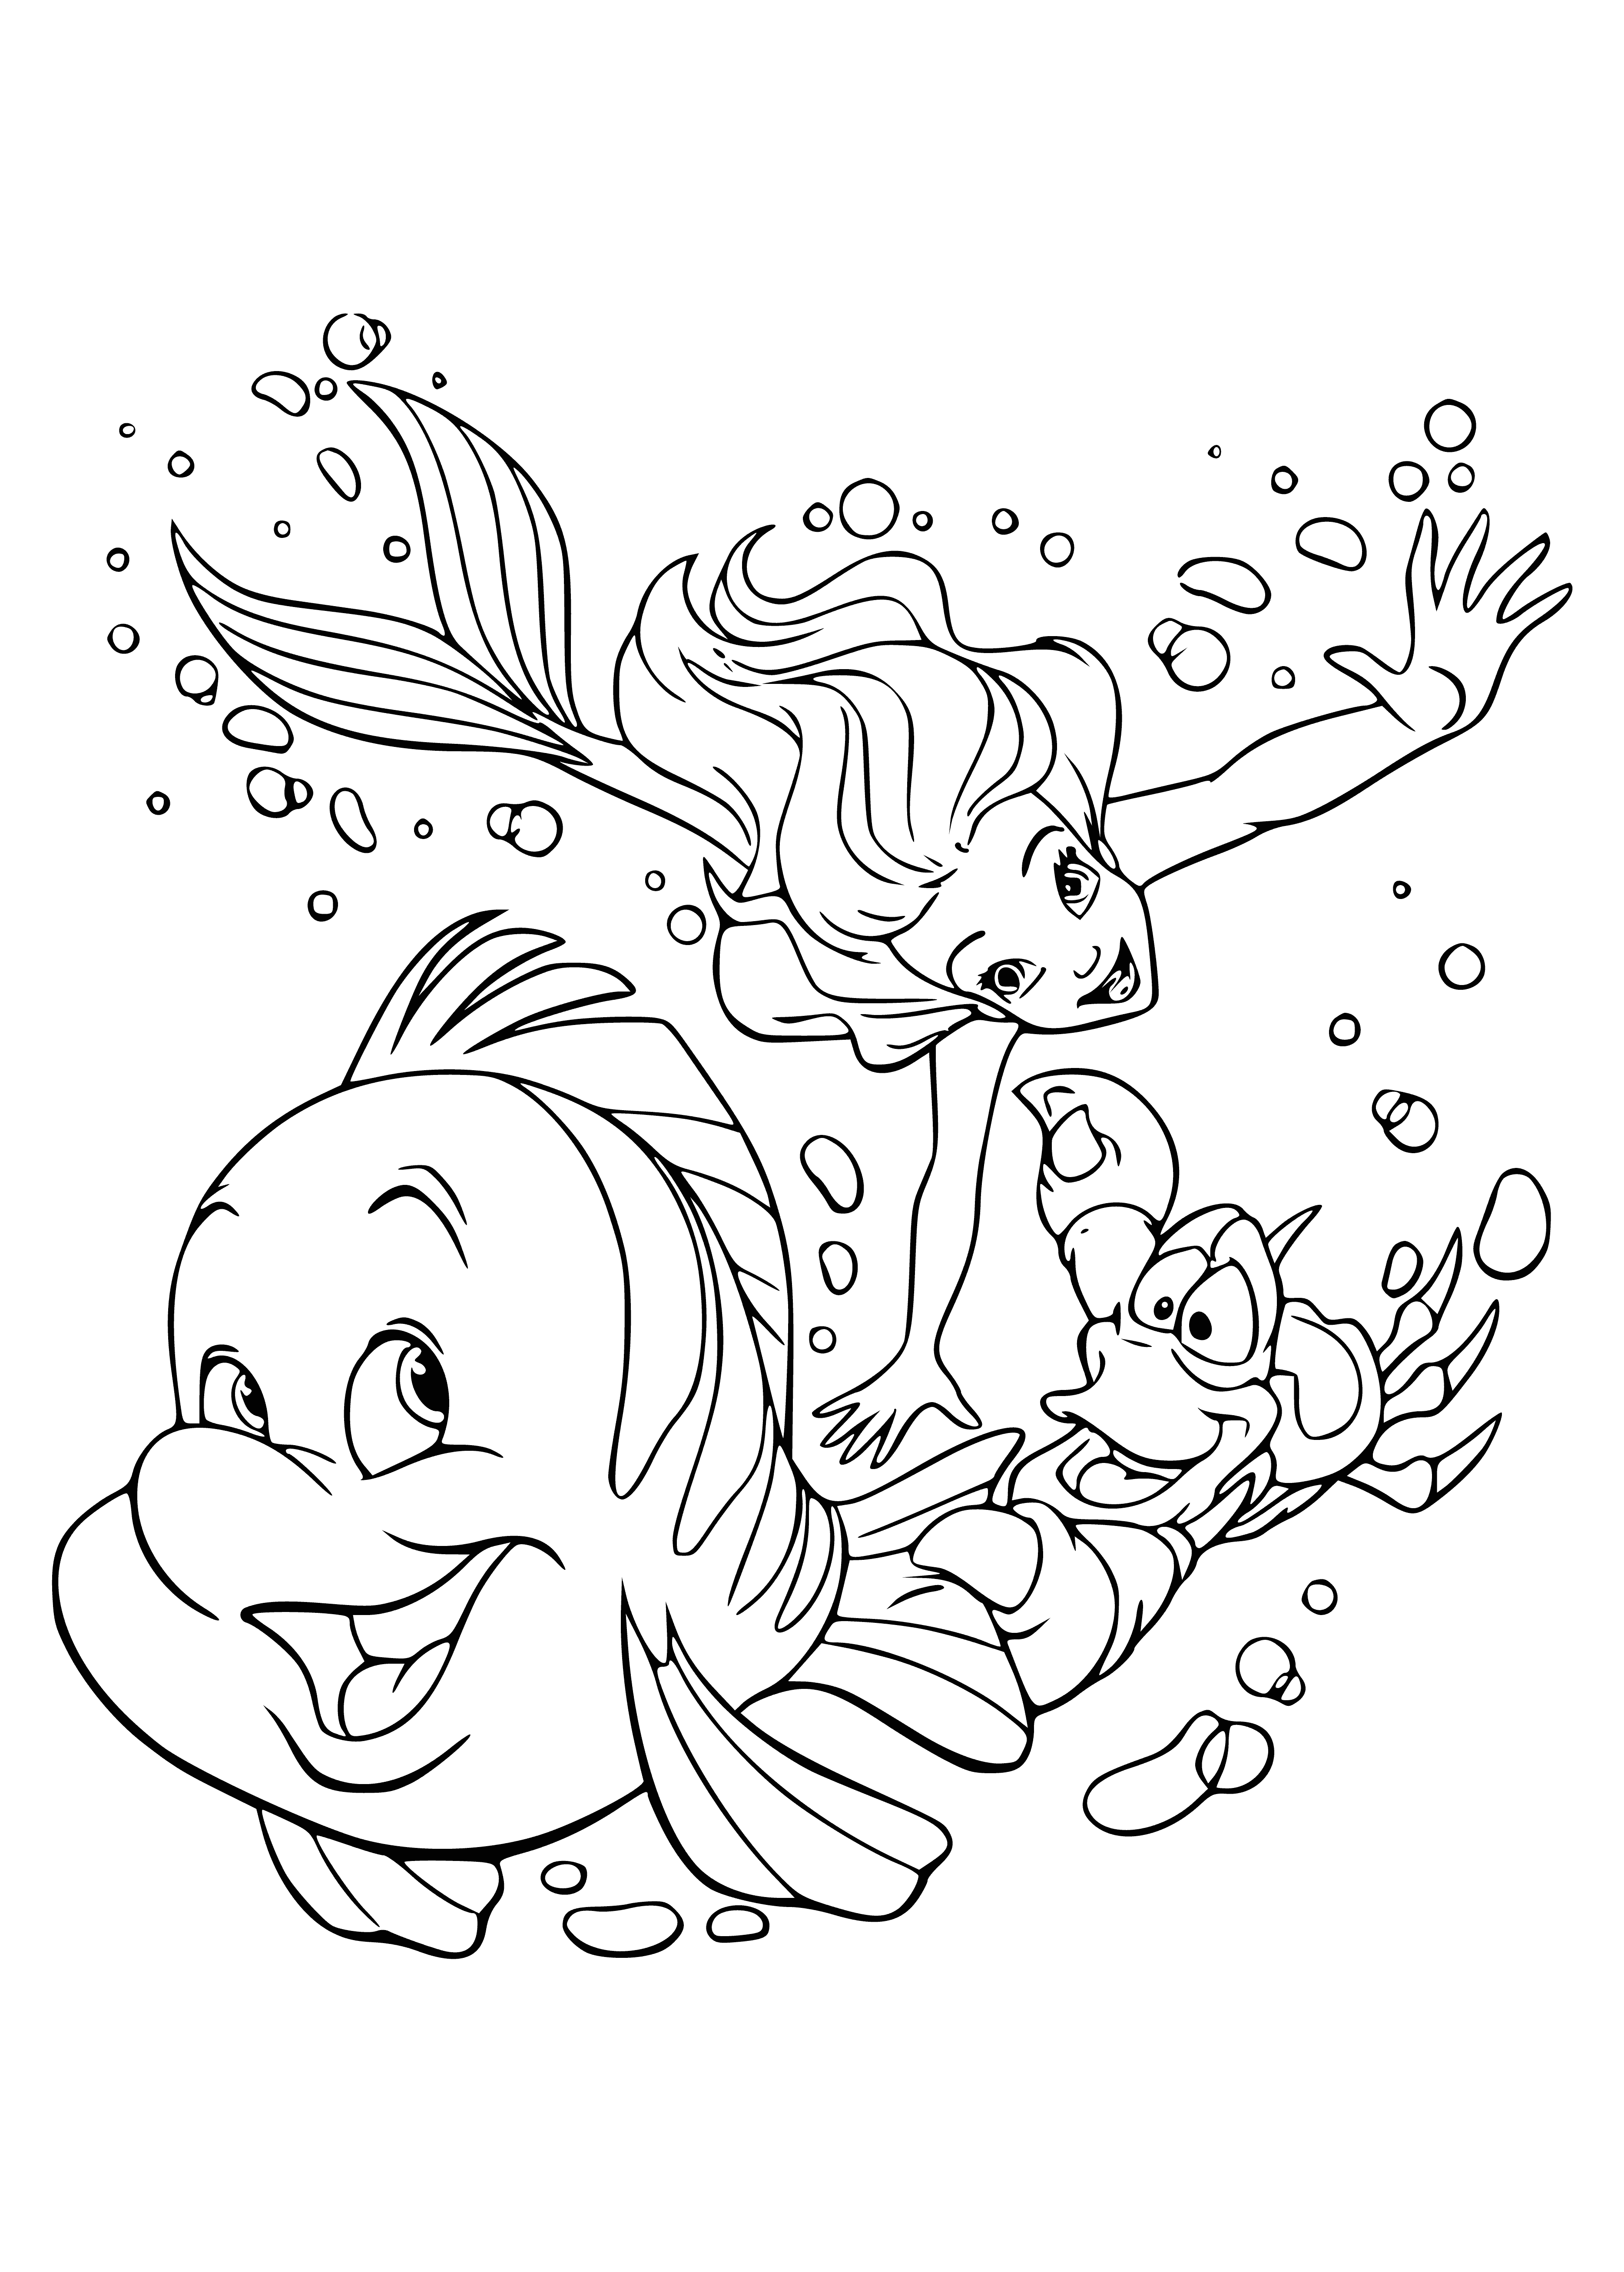 coloring page: Mermaid & Flounder watch as Sebastian, a crab, approaches them on a rock. #LittleMermaid